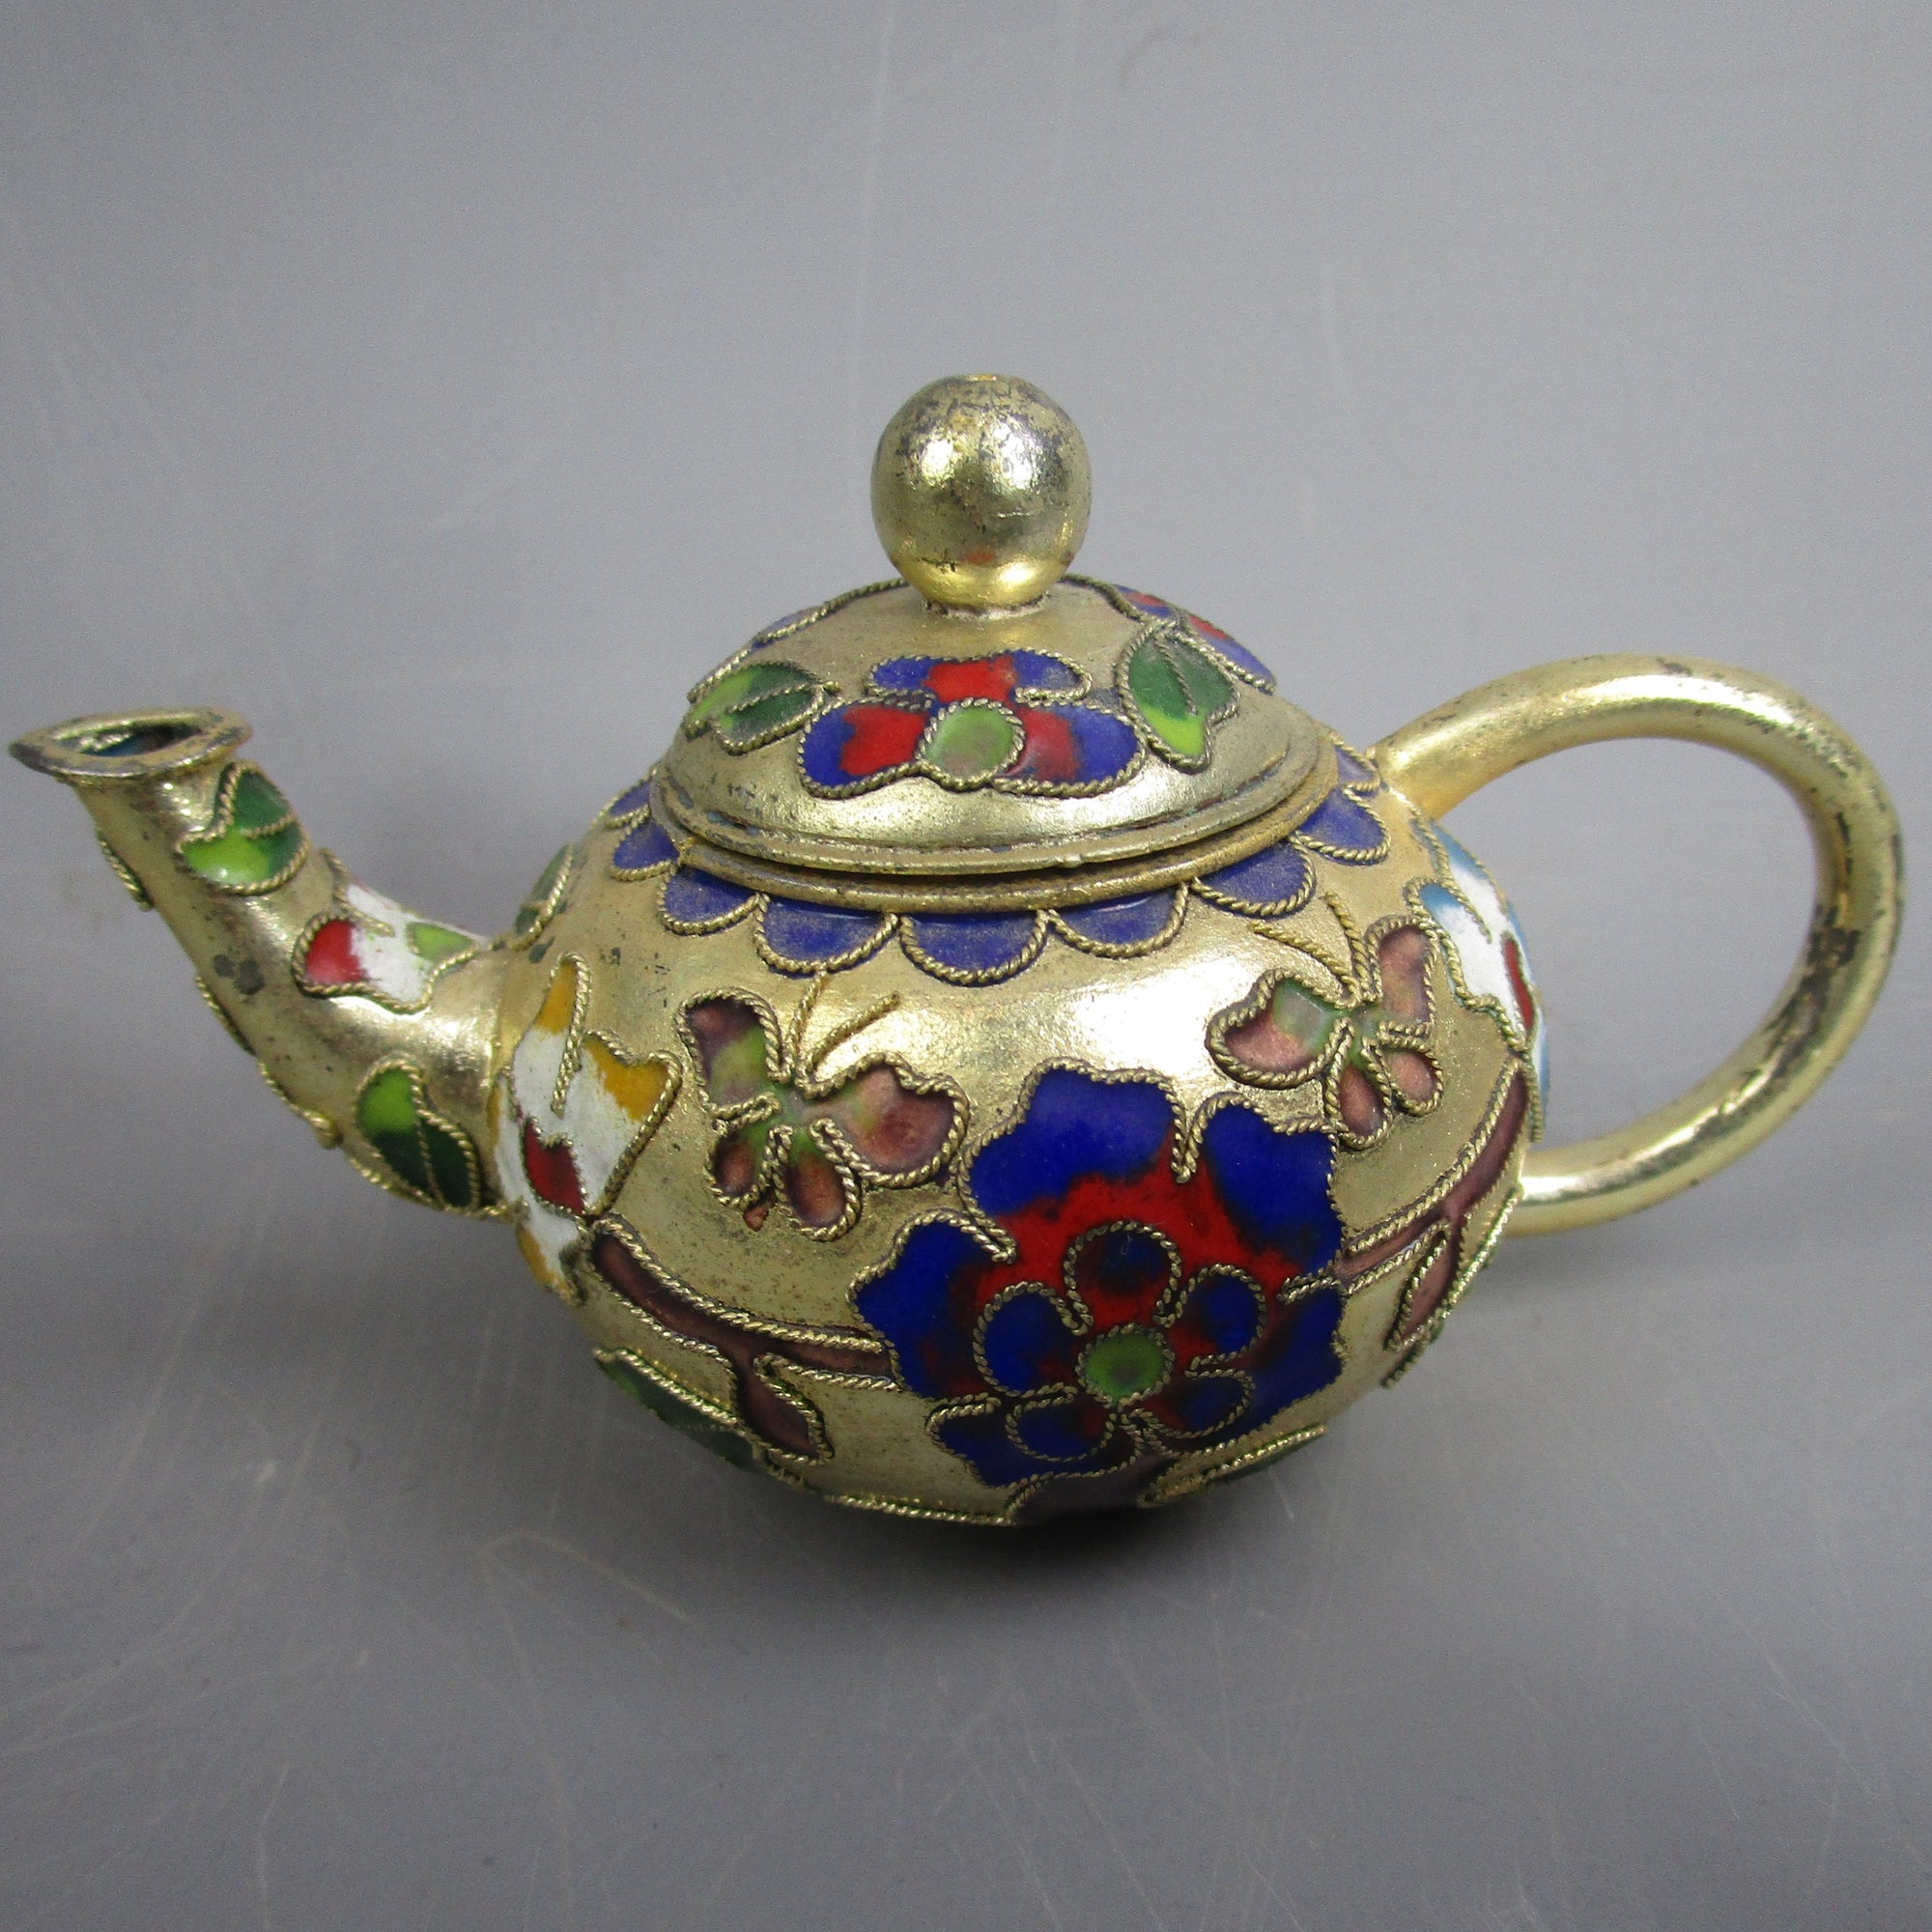 Miniature Brass and Enamel Painted with Howens and Butterflies Teapot Vintage c1970